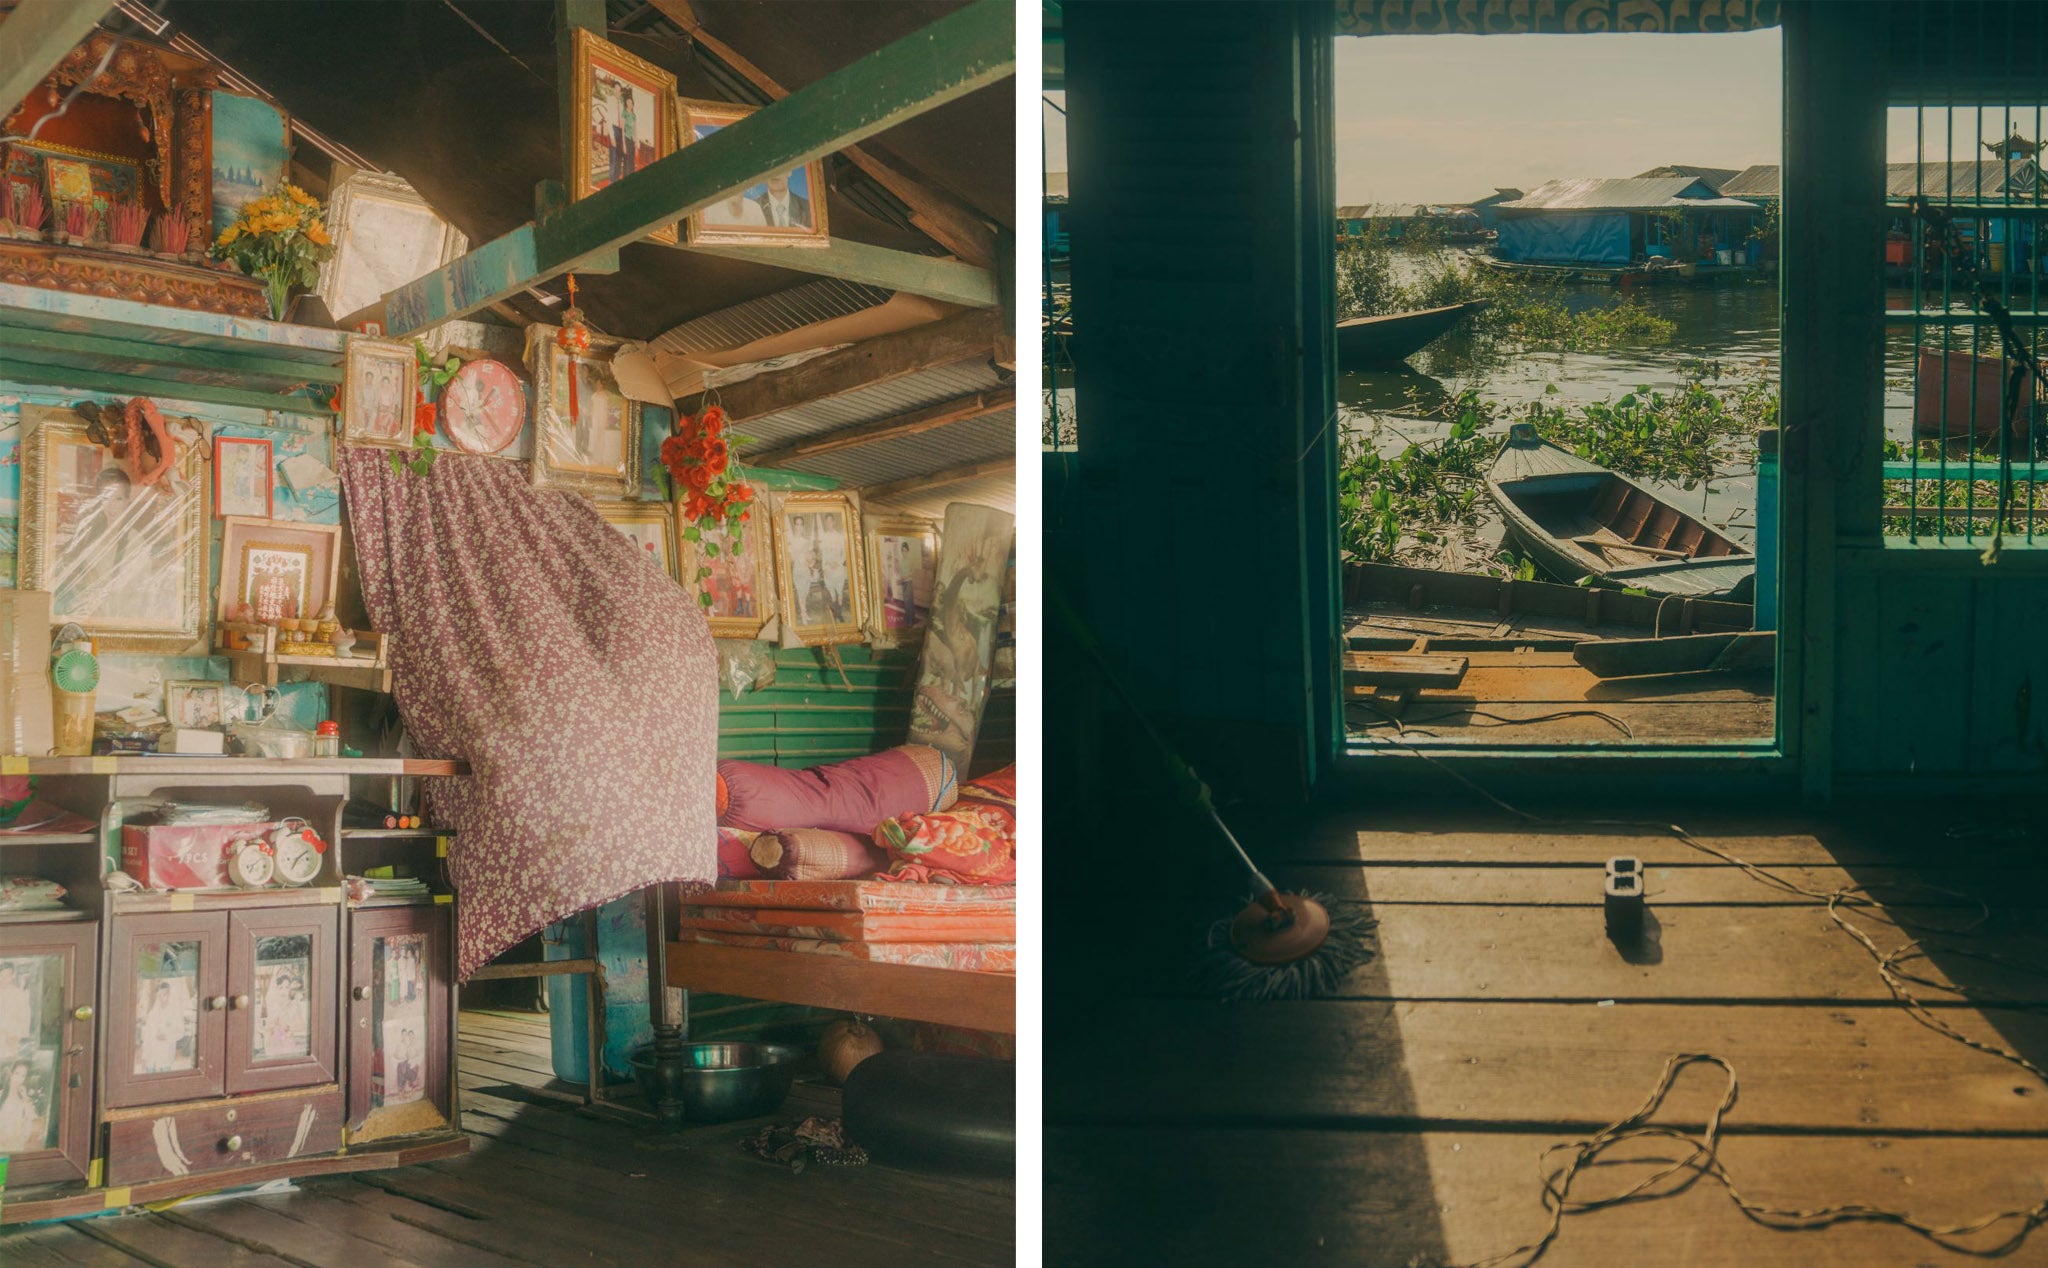 Left, an interior of a floating home; right, a view of Kampong Luong floating village